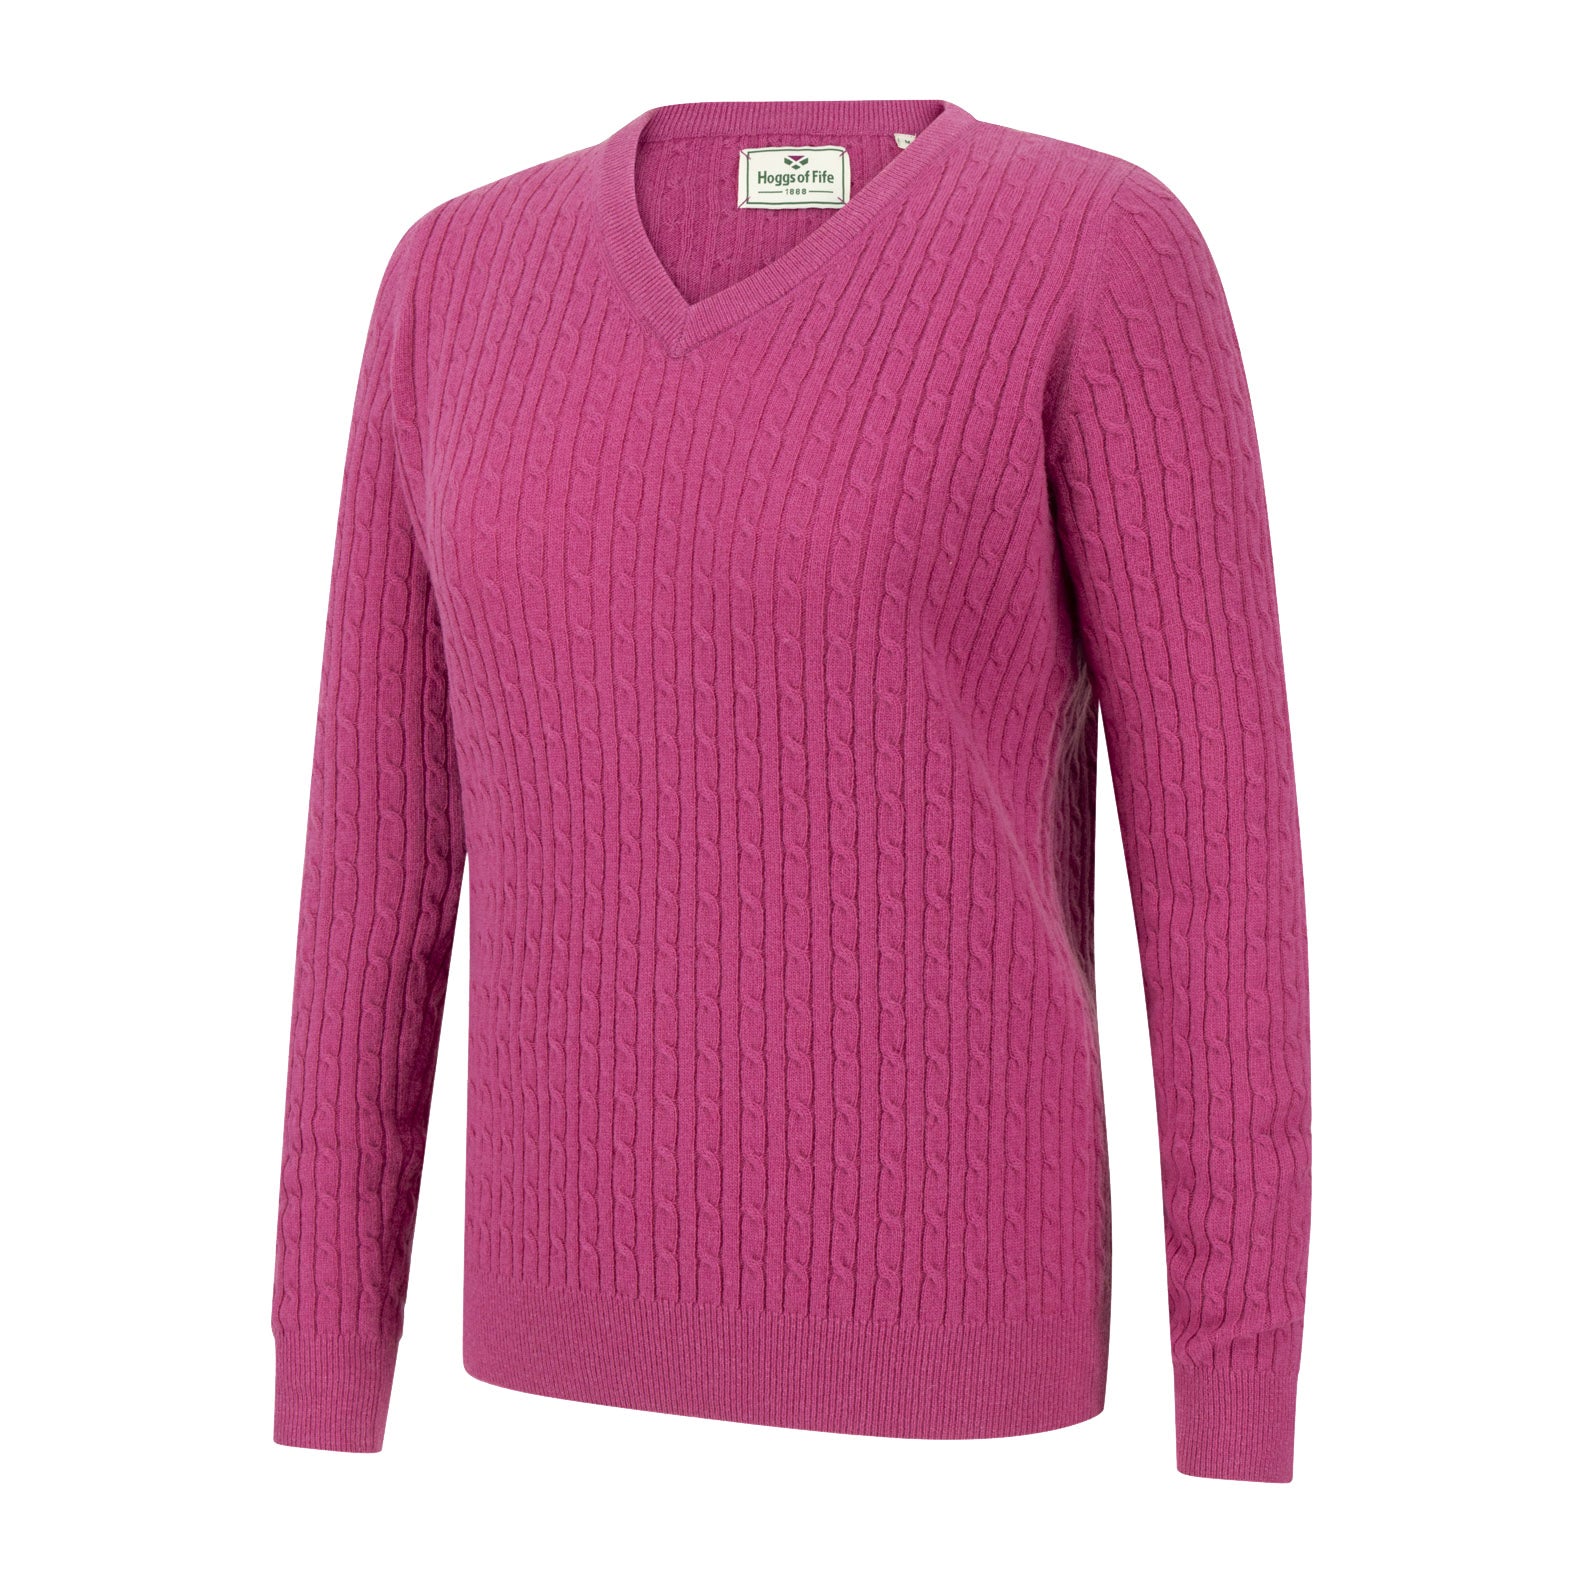 Hoggs-of-Fife-Lauder-Ladies-Cable-Pullover